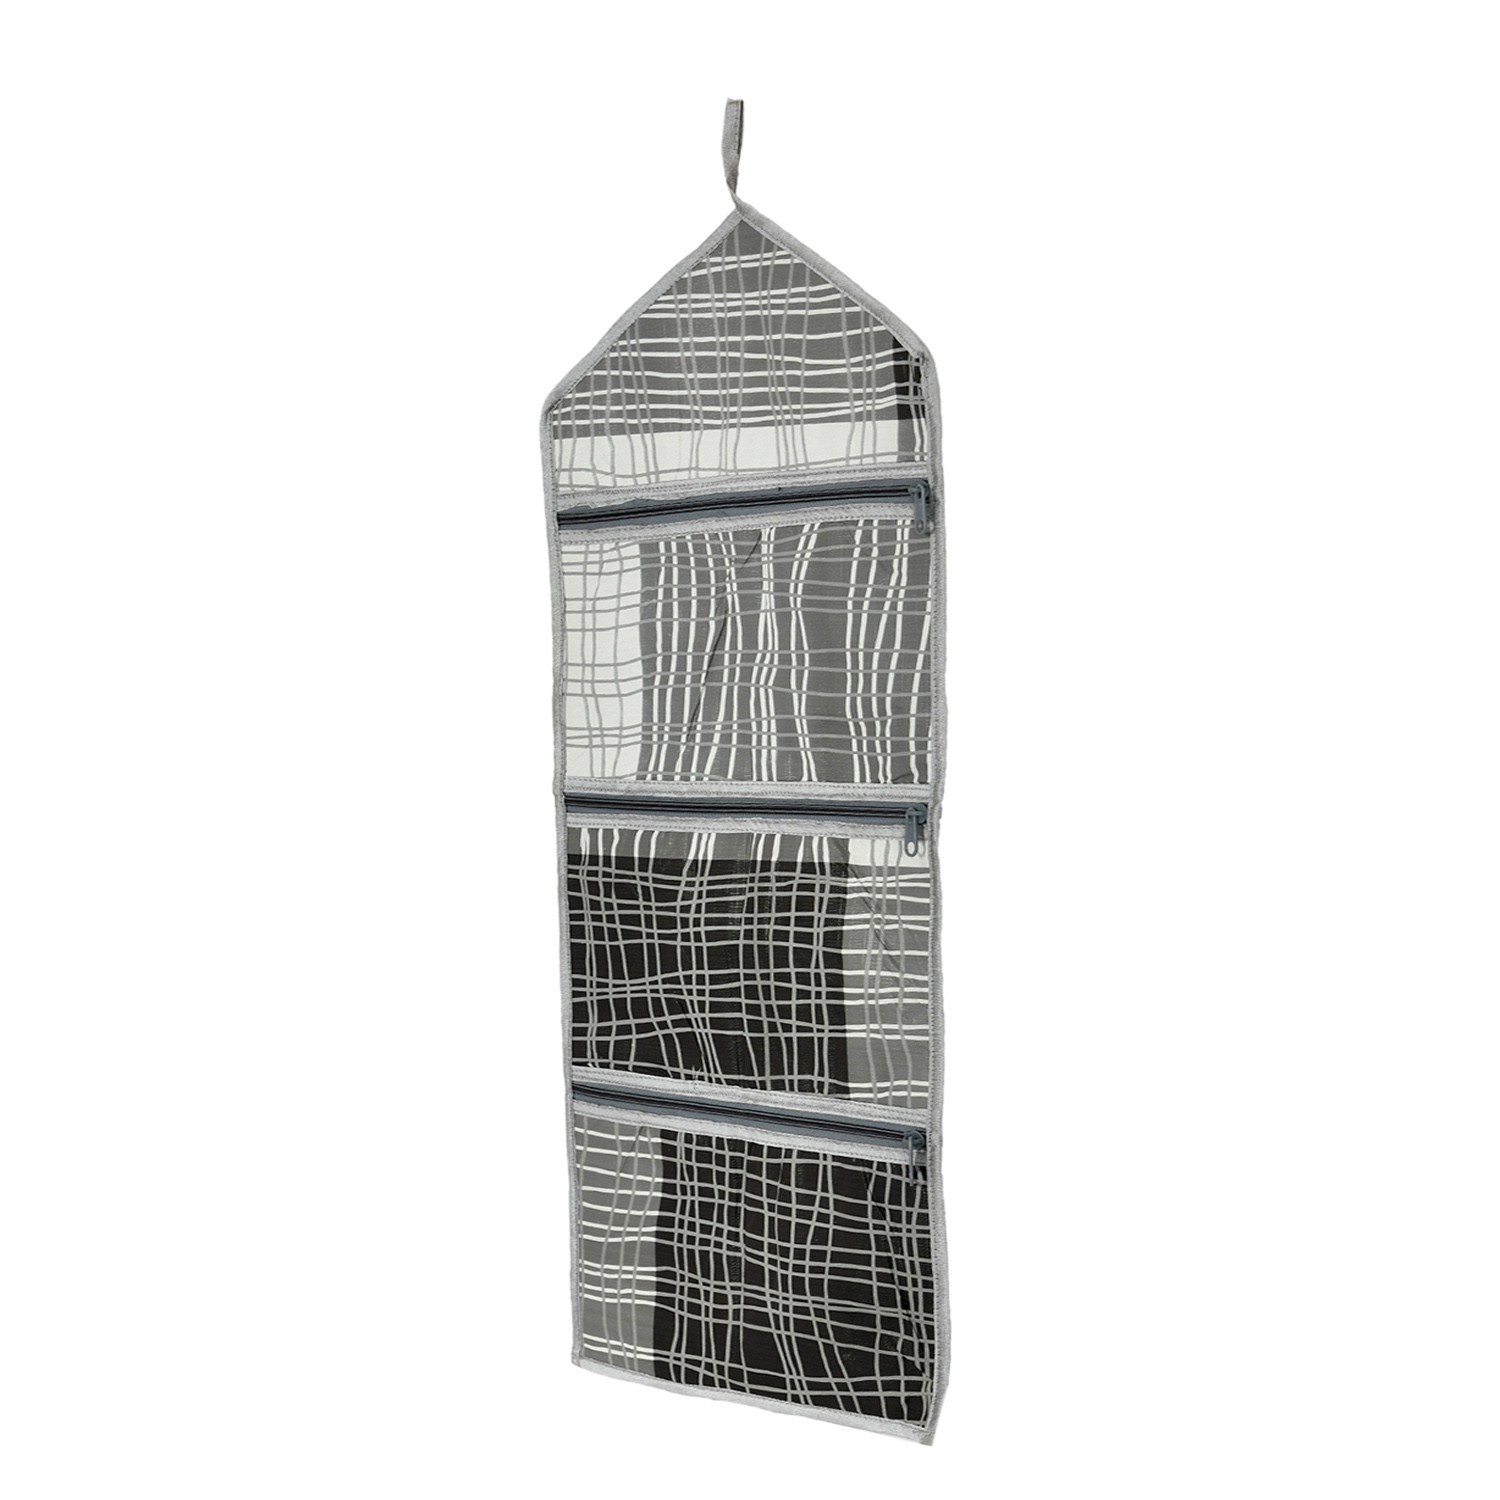 Kuber Industries Paper Holder | Foldable Hanging Organizer | PVC Lining Pattern Document Holder | 3 Pocket Wall Hanging Holder with Zipper | Gray & Black